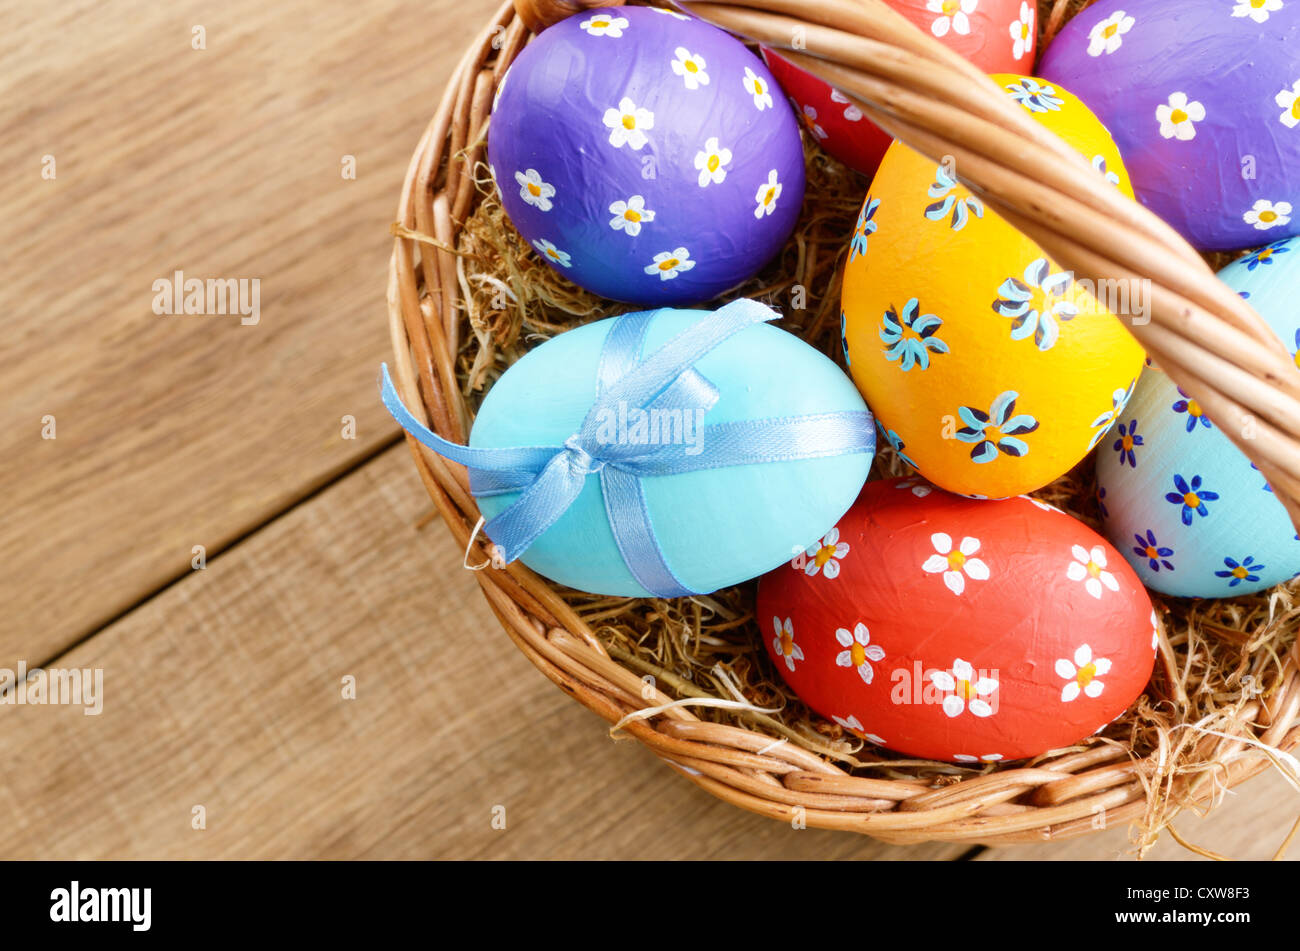 Easter basket with decorated eggs Stock Photo